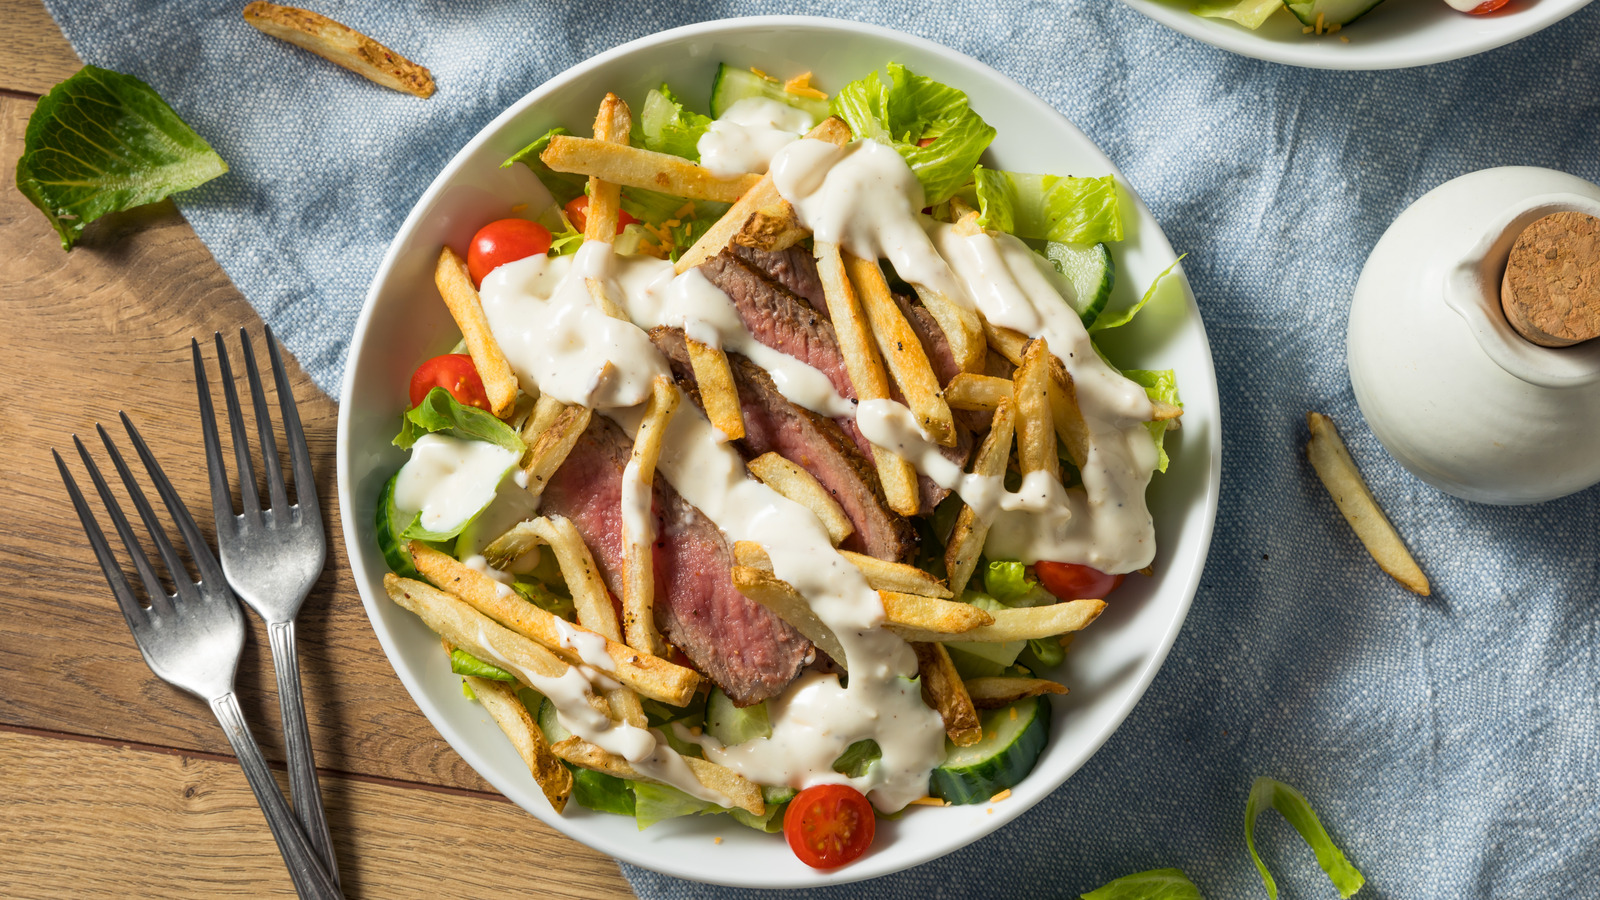 Pittsburgh's Most Iconic Salad Is Topped With French Fries